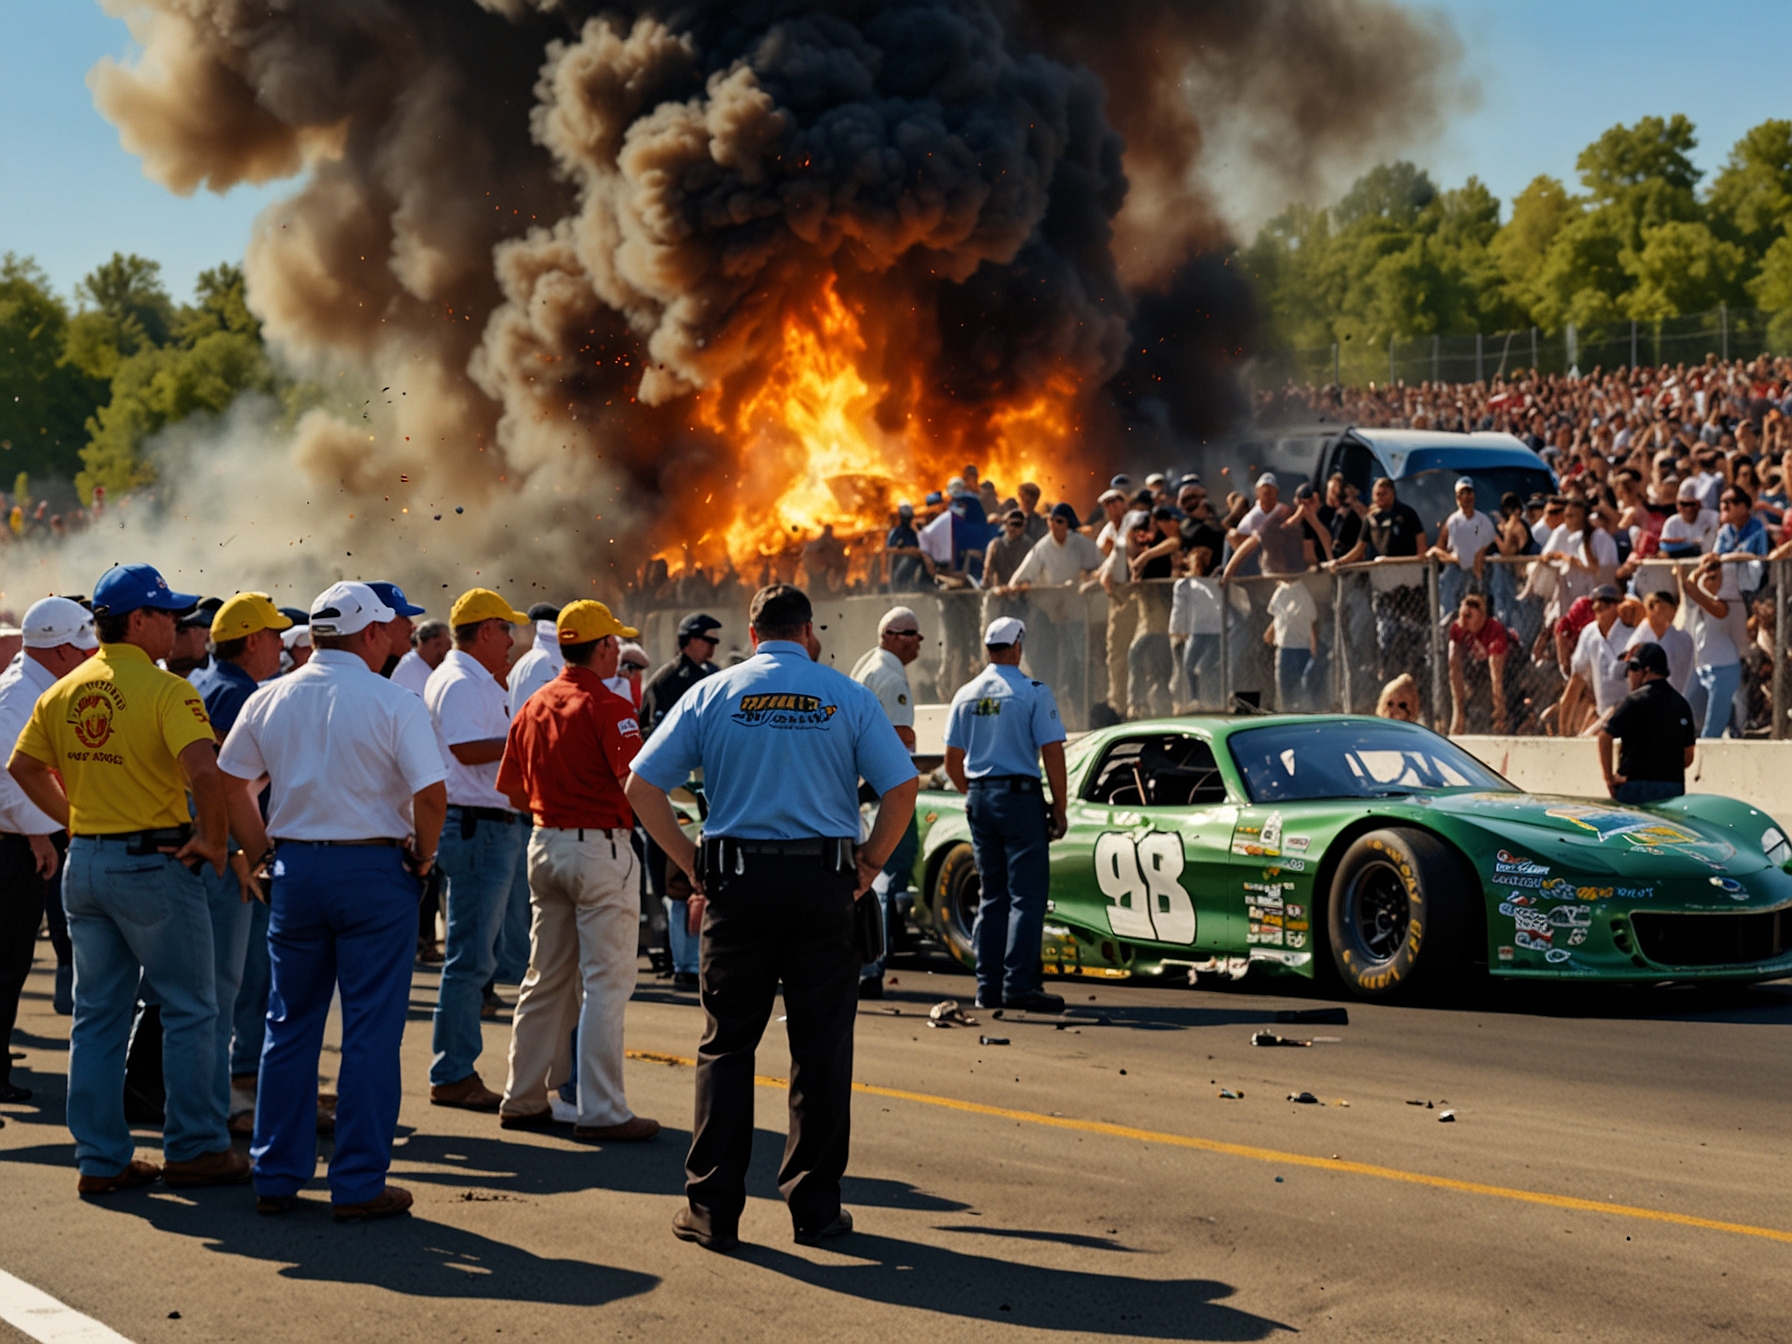 The image shows a concerned crowd of spectators and racing team members looking on as emergency teams handle the aftermath of John Force's fiery crash, underscoring the sport's inherent risks.